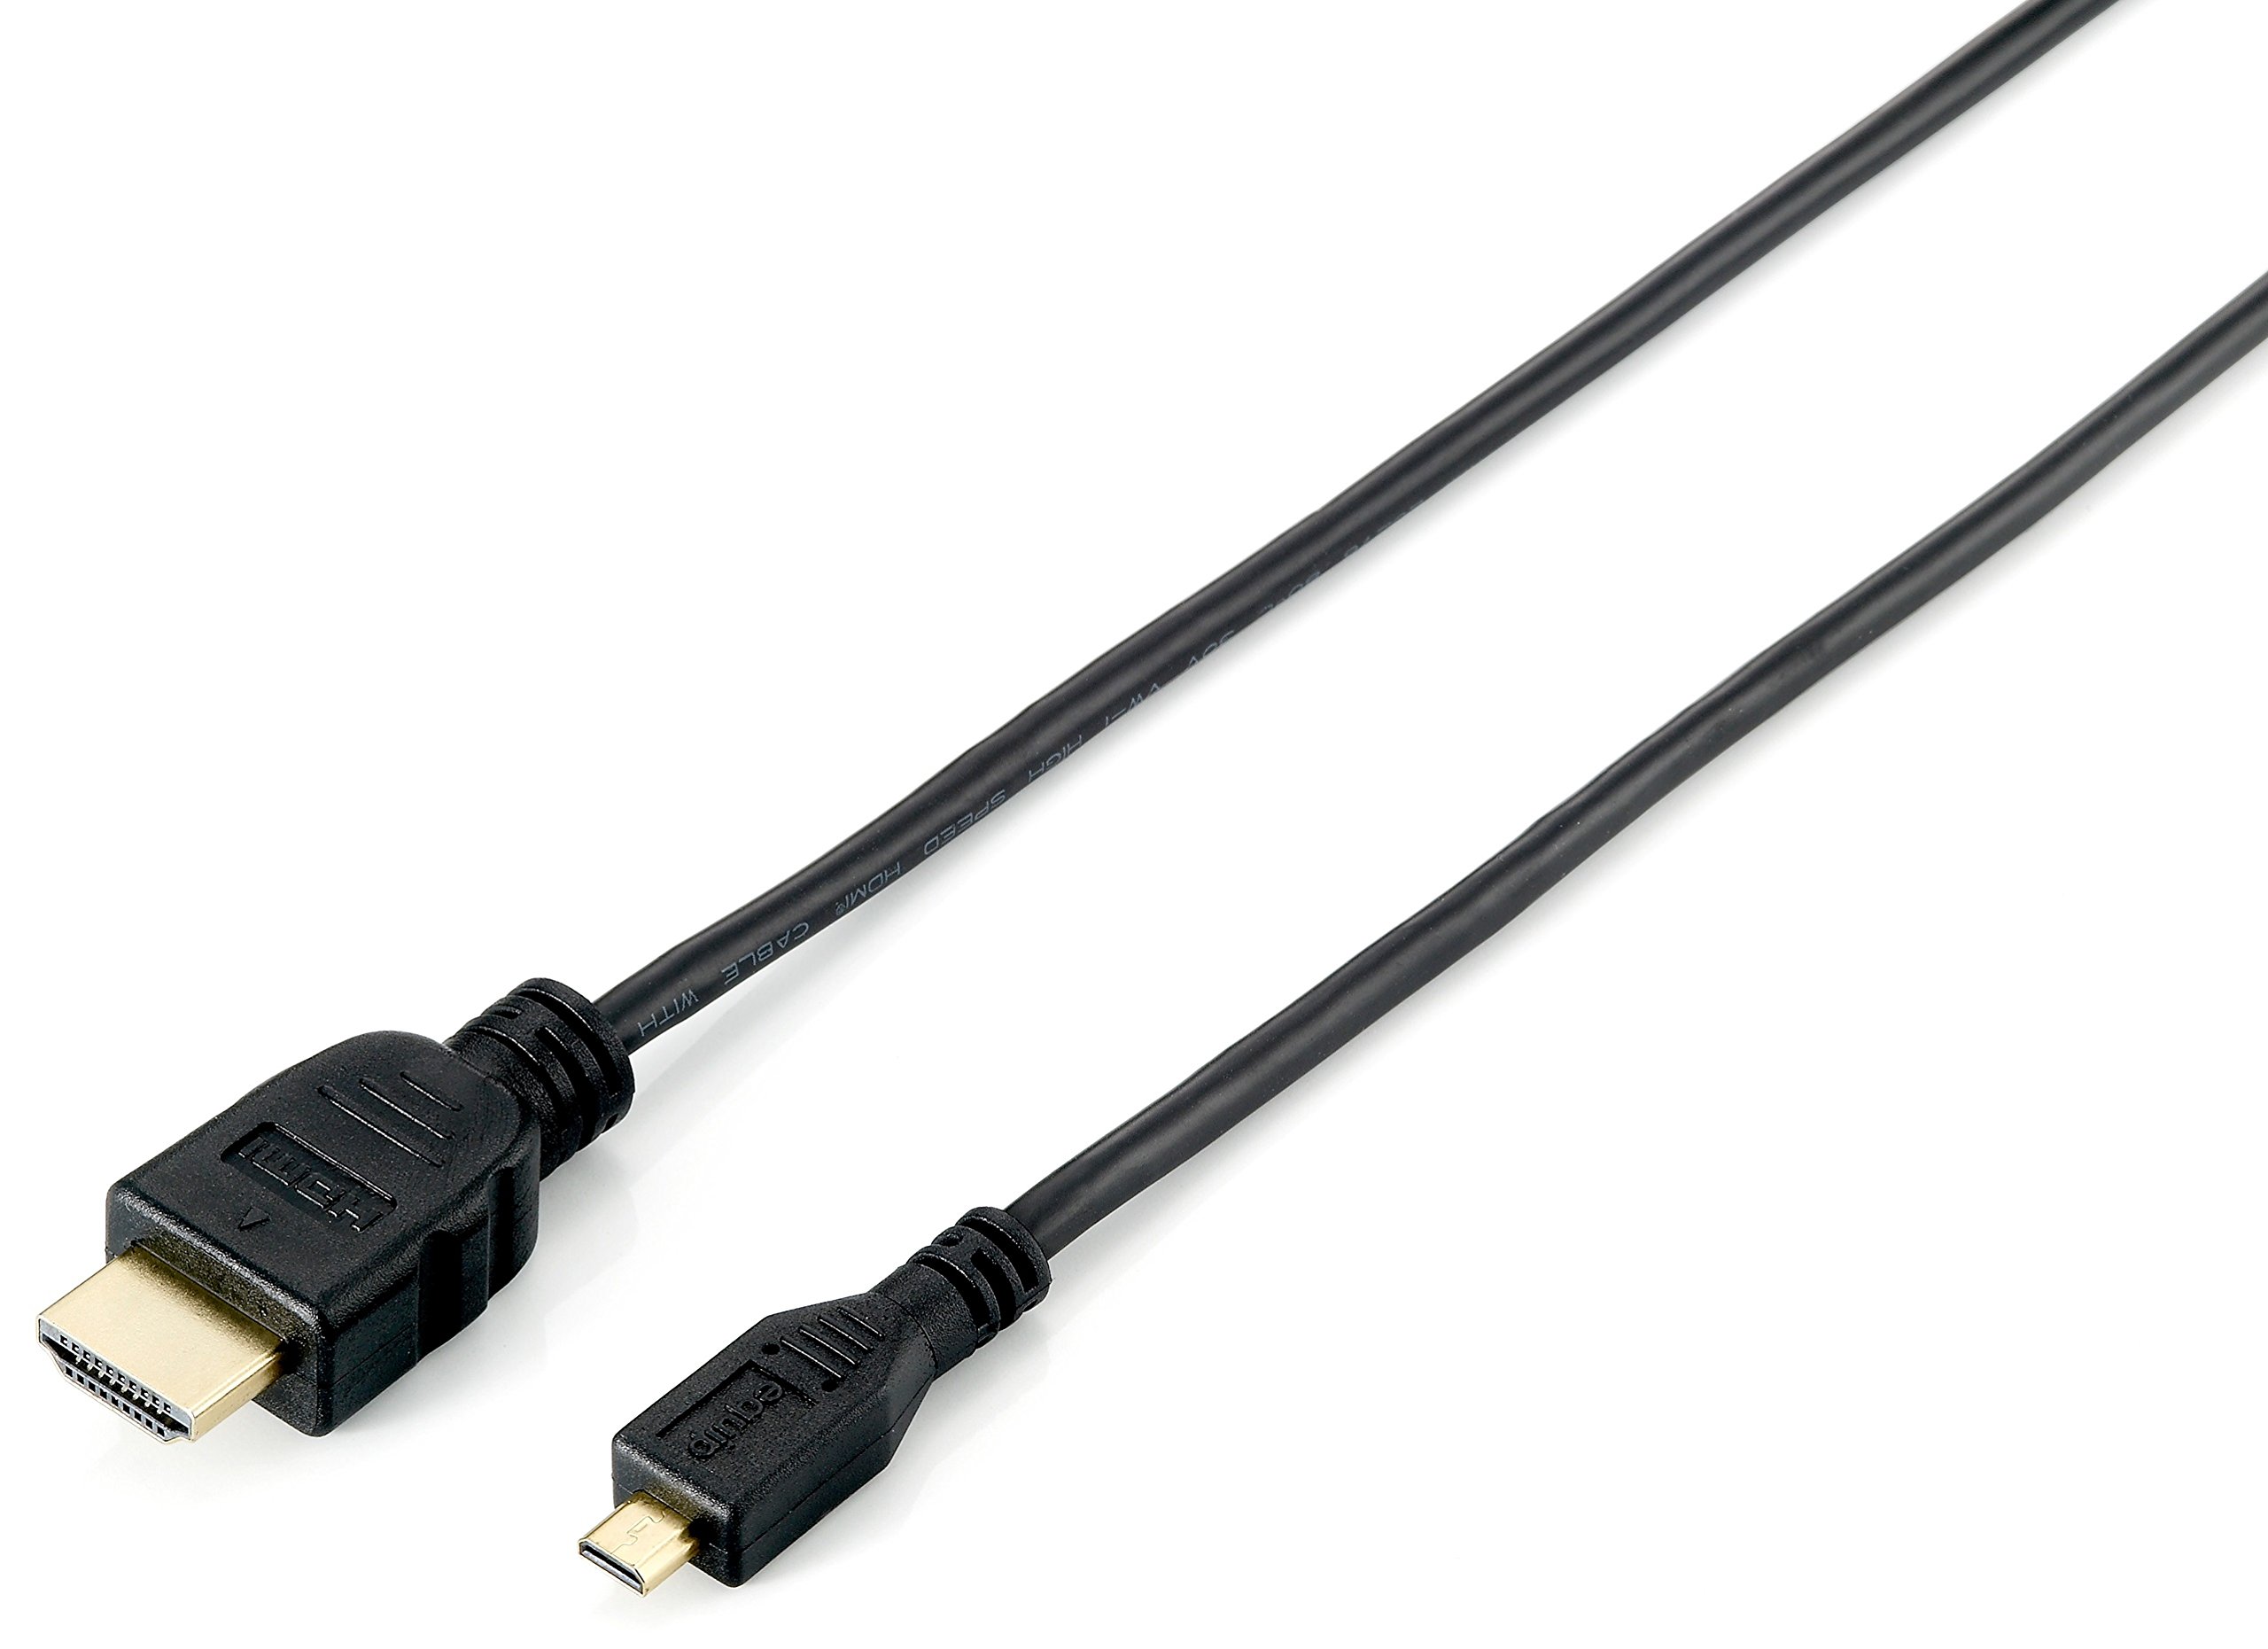 HIGHSPEED HDMI TO MICROHDMI ADAPTER